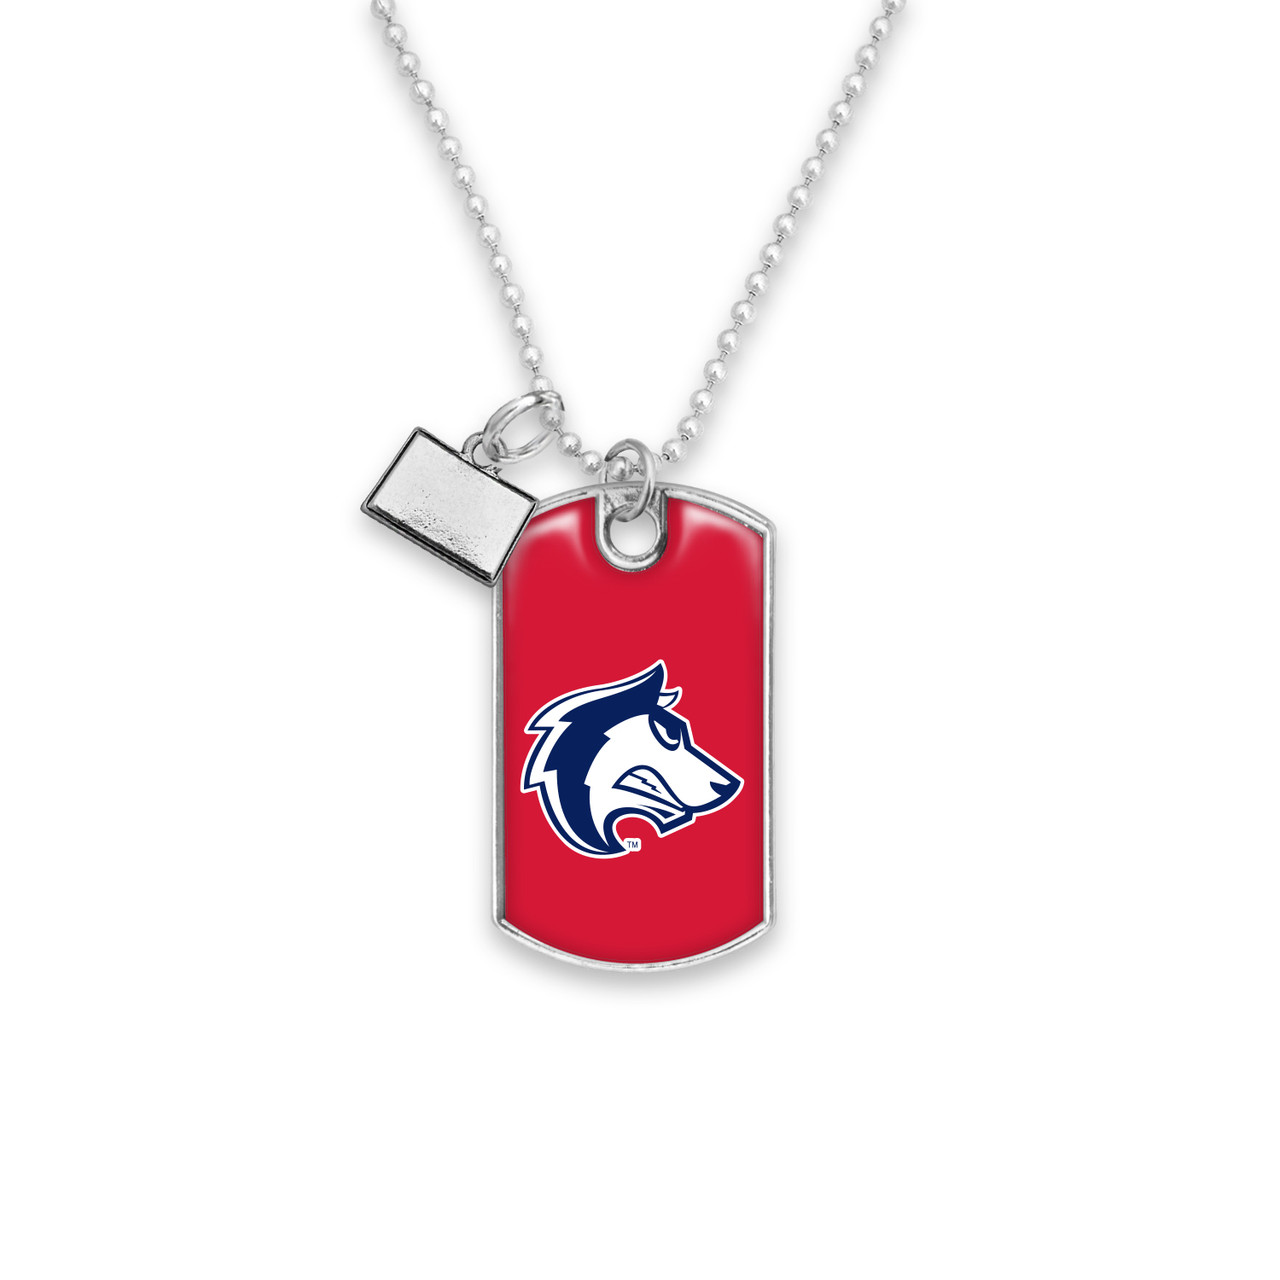 Colorado State Pueblo Thunderwolves Car Charm- Rear View Mirror Dog Tag with State Charm